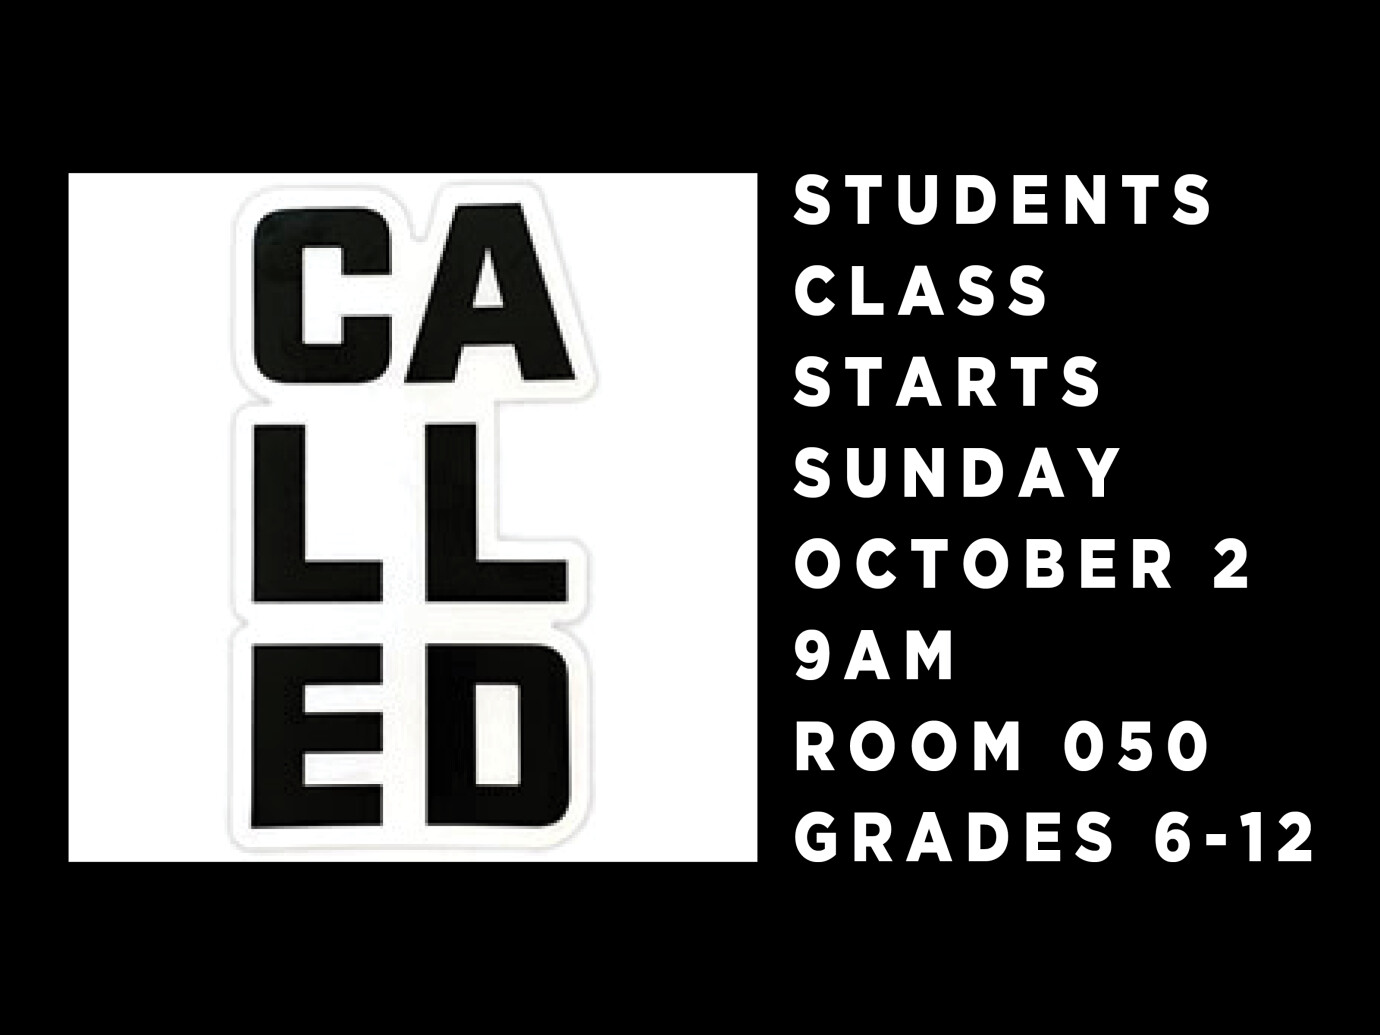 New Students Class - The Called